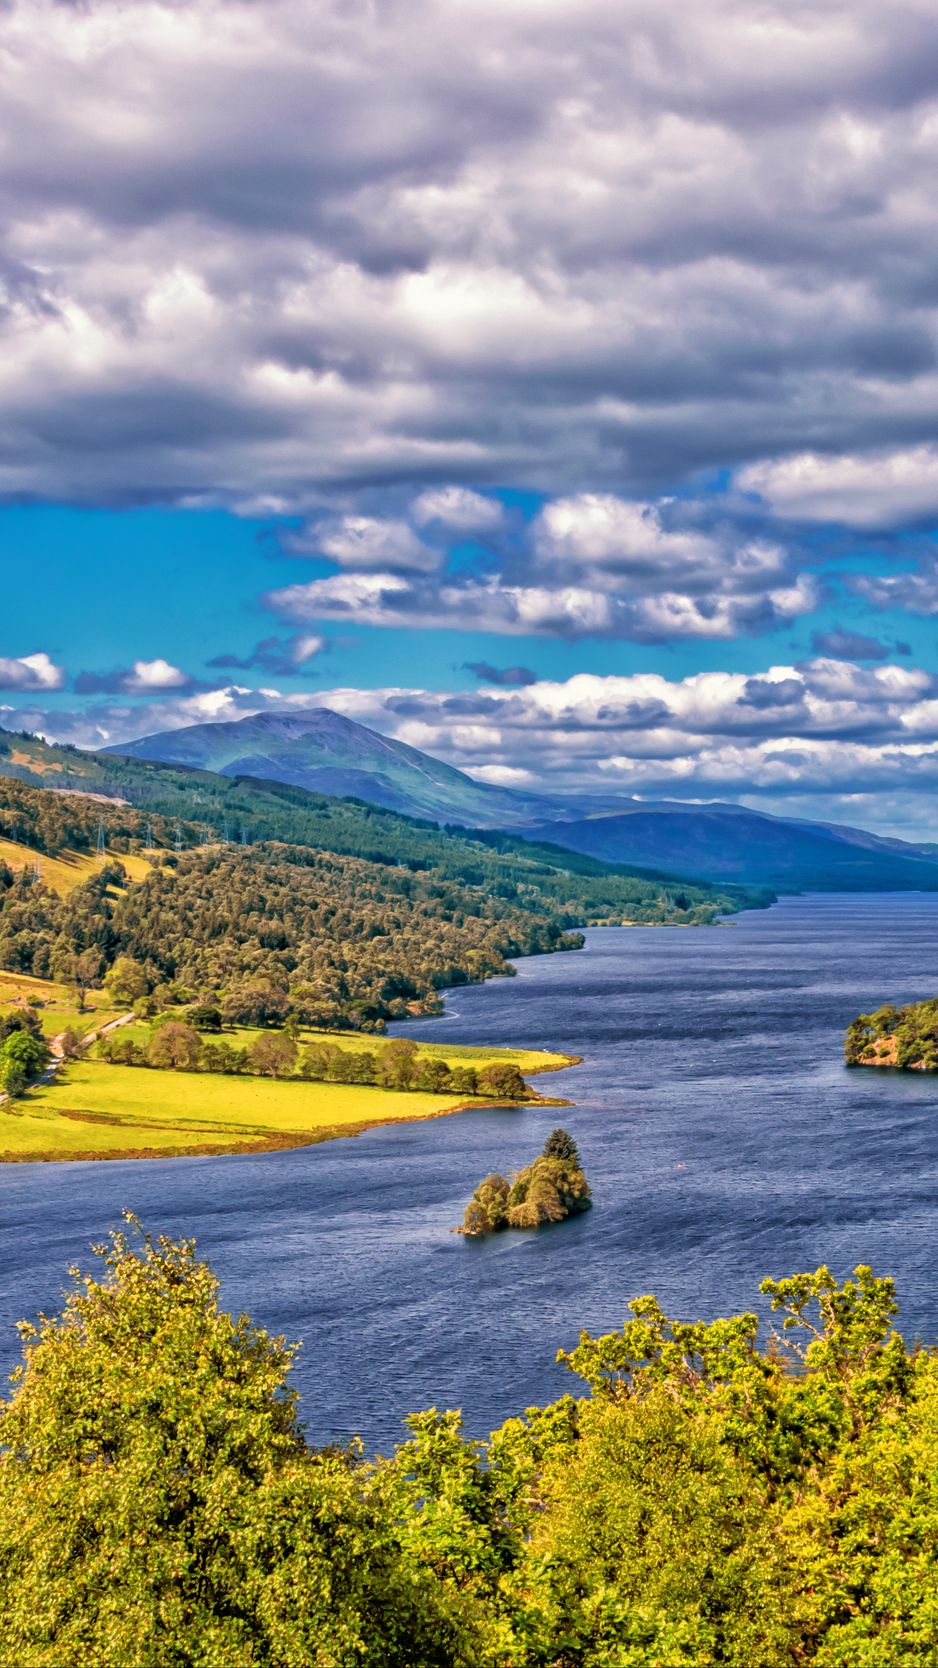 Download wallpaper 938x1668 scotland highlands lake hdr iphone 876s6  for parallax hd background